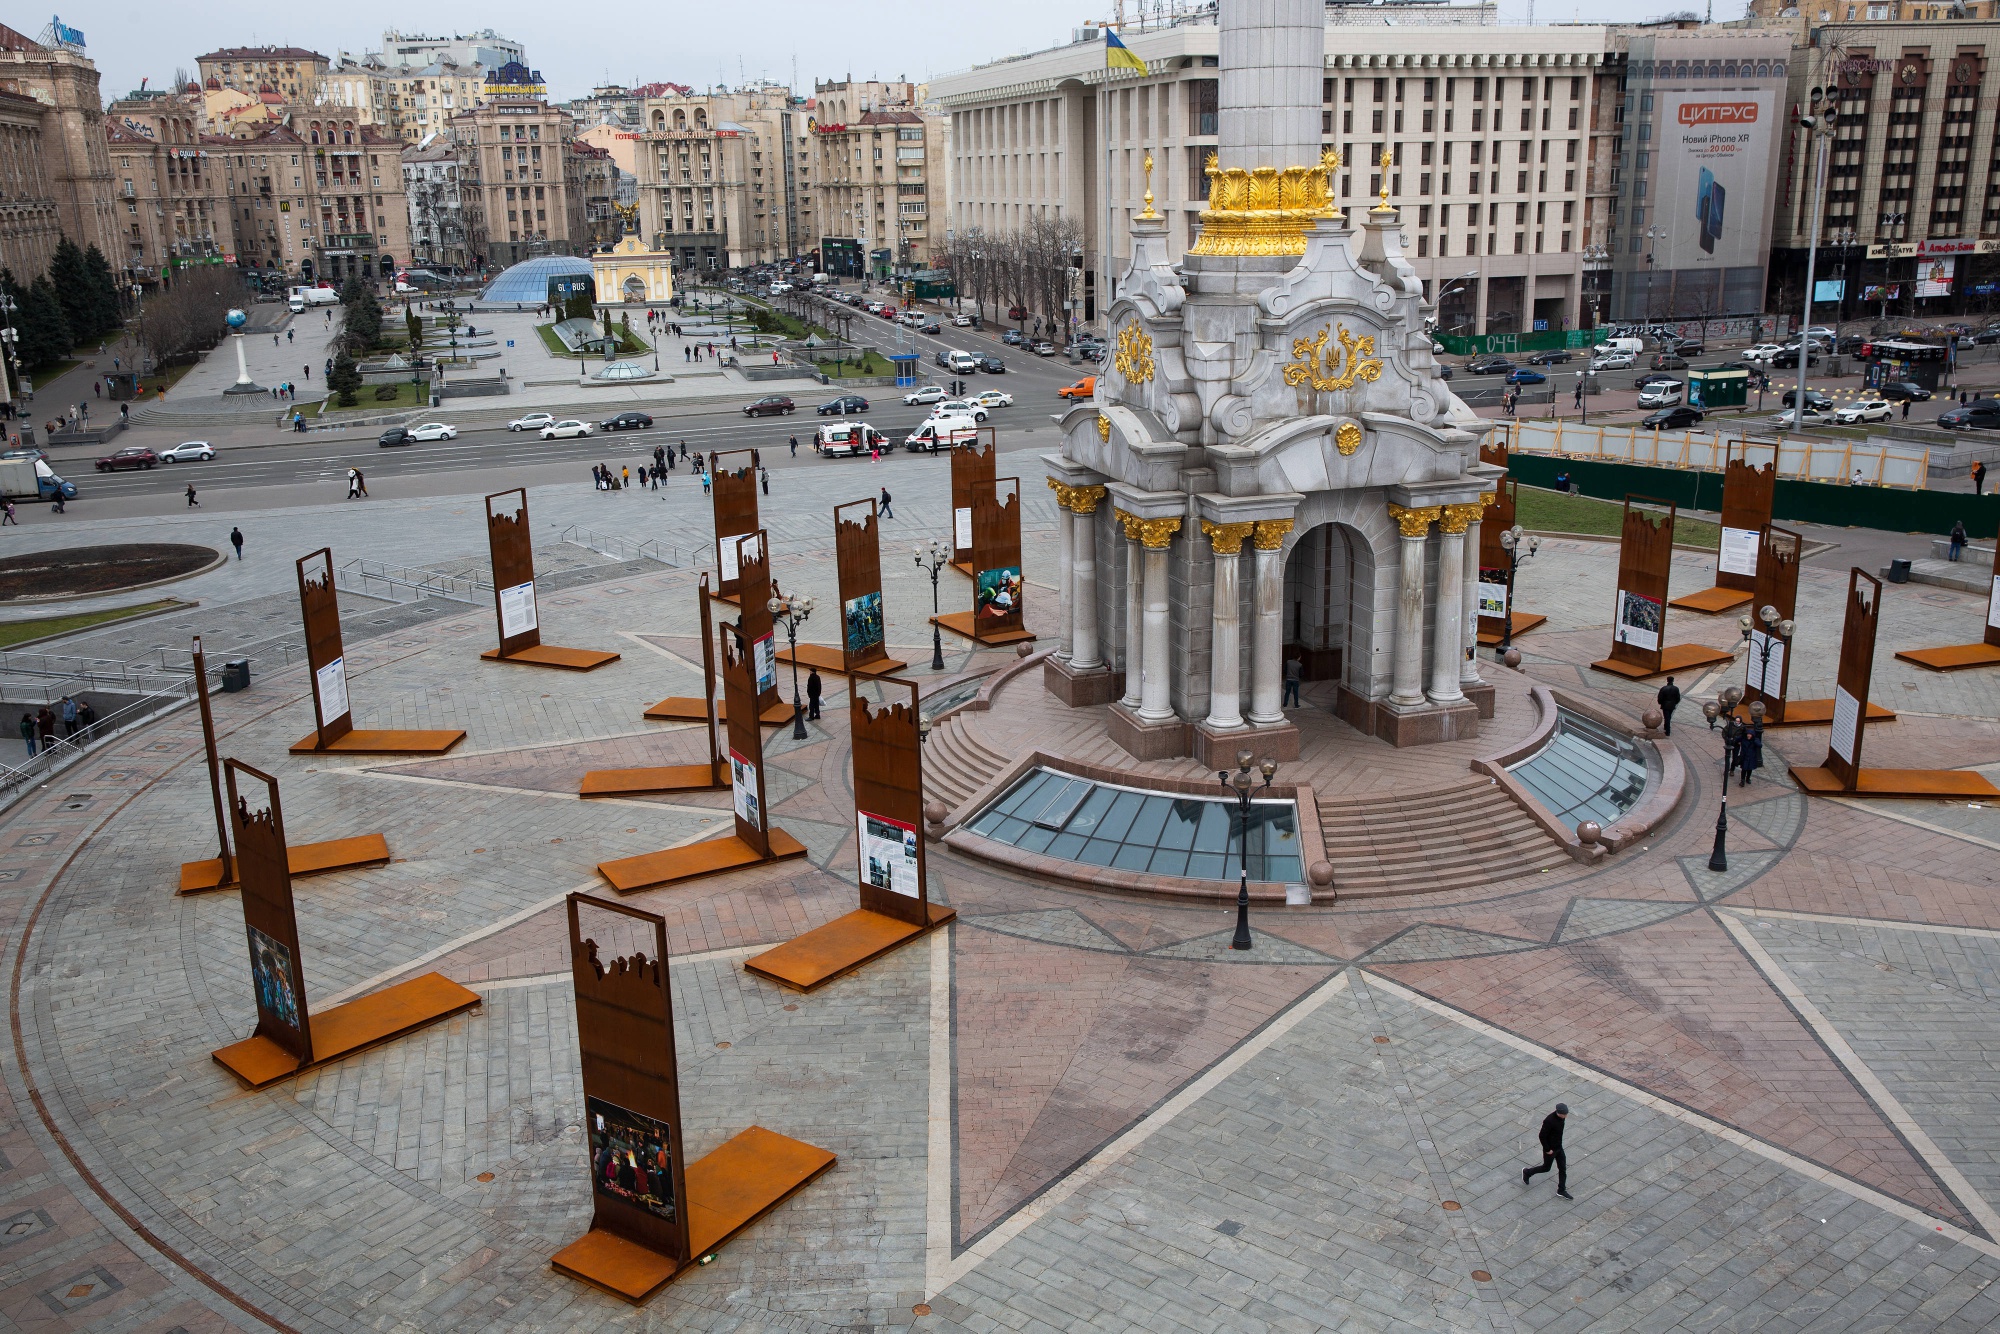 Pedestrians walk past the independence monument on Independence Square, also known as Maidan, in Kiev, Ukraine.